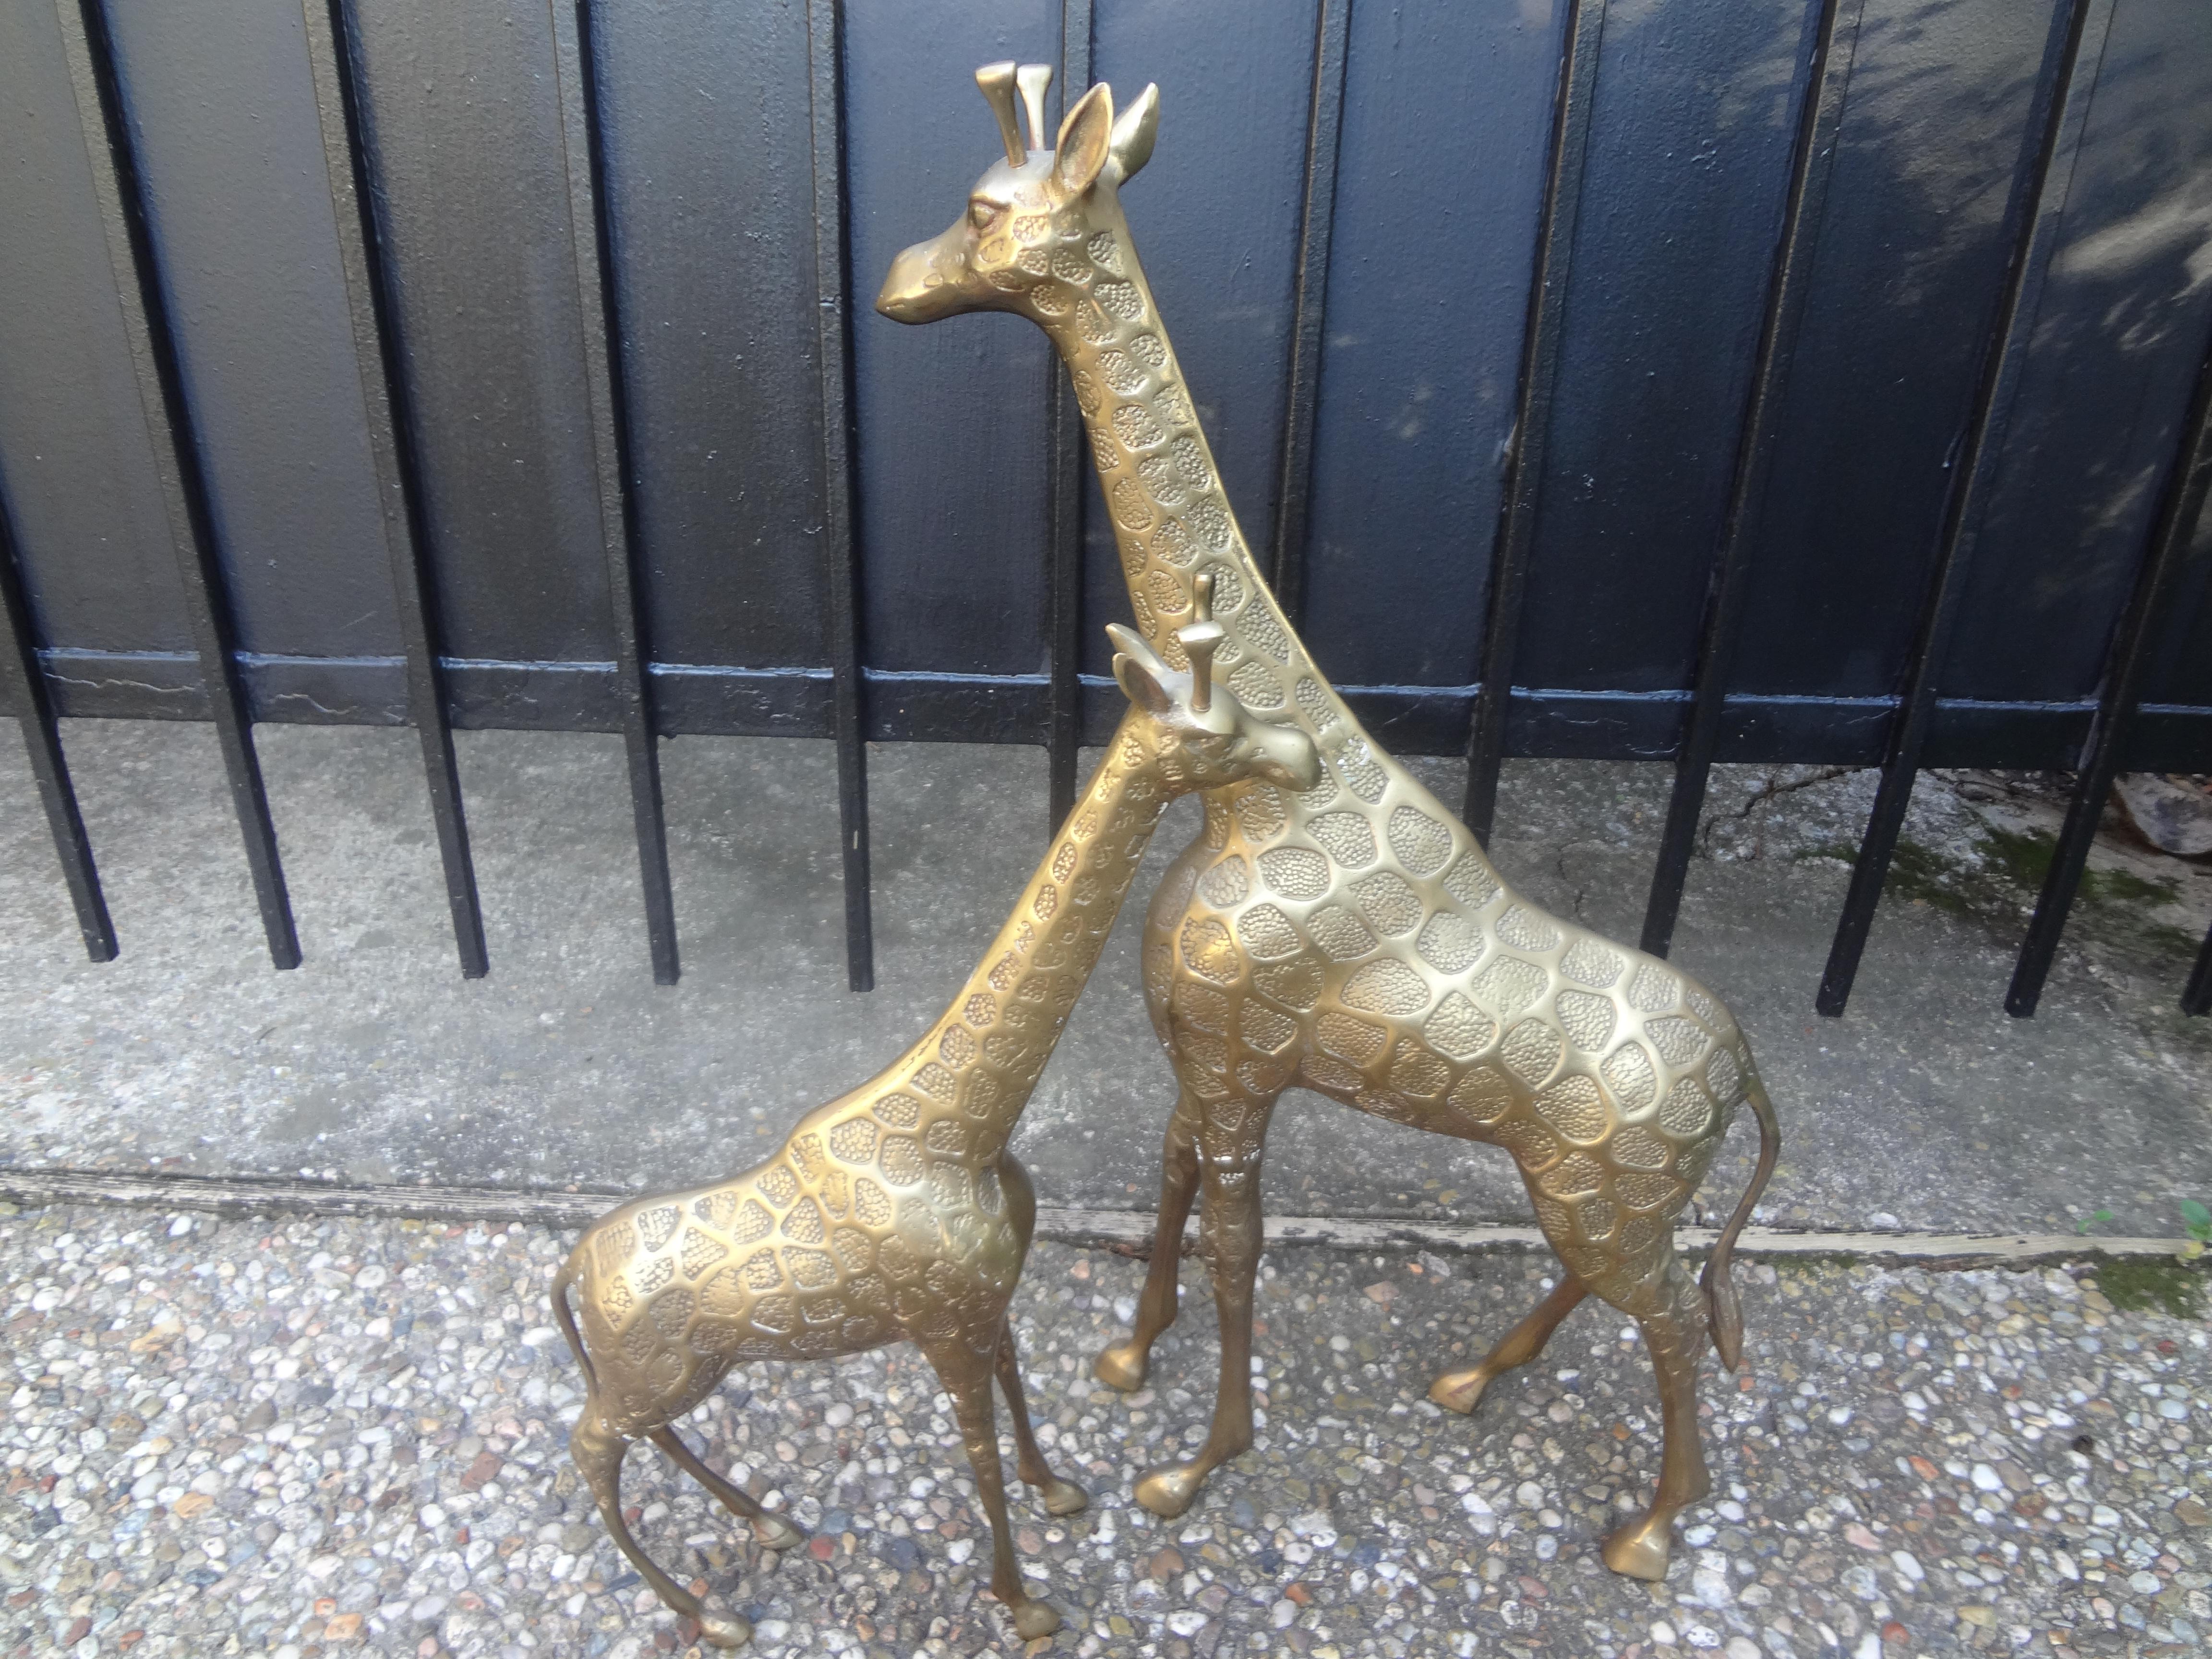 Pair of midcentury Hollywood Regency brass giraffe statues or sculptures. The pair consists of a taller male-23 inches H, 18 inches L and 3.5 inches W. Female-17.5 inches H, 12.5 inches L and 3.5 inches D. great patina!